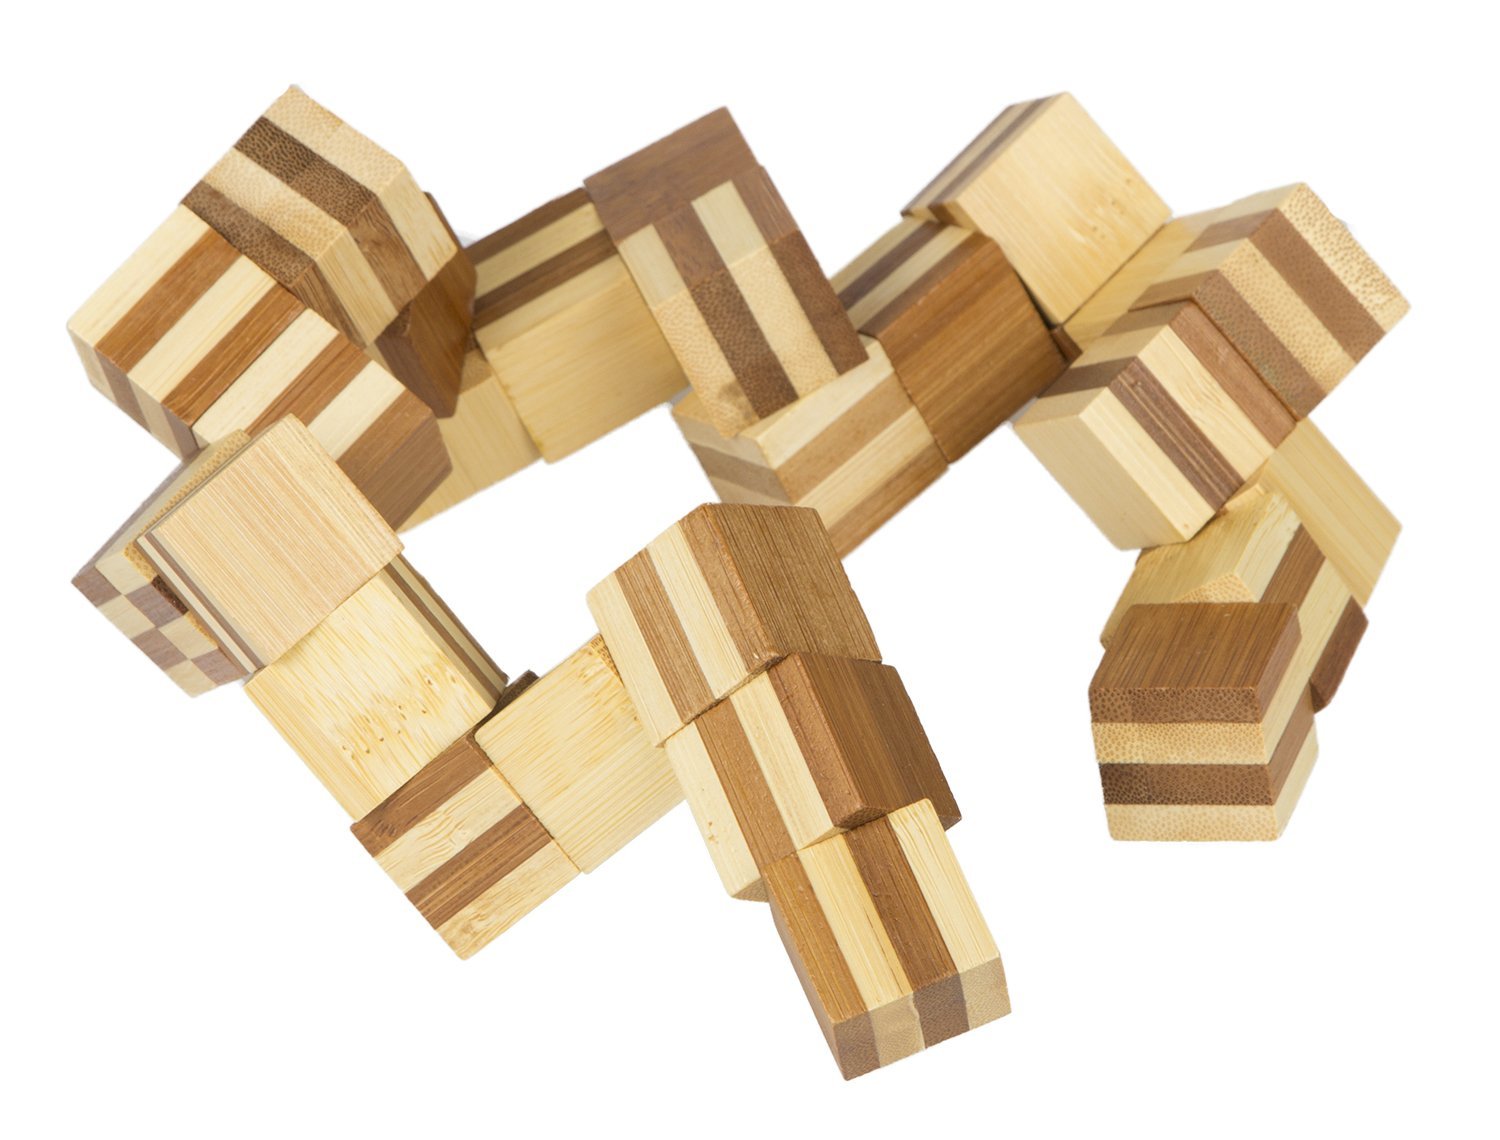 Bamboo snake cube puzzle solution